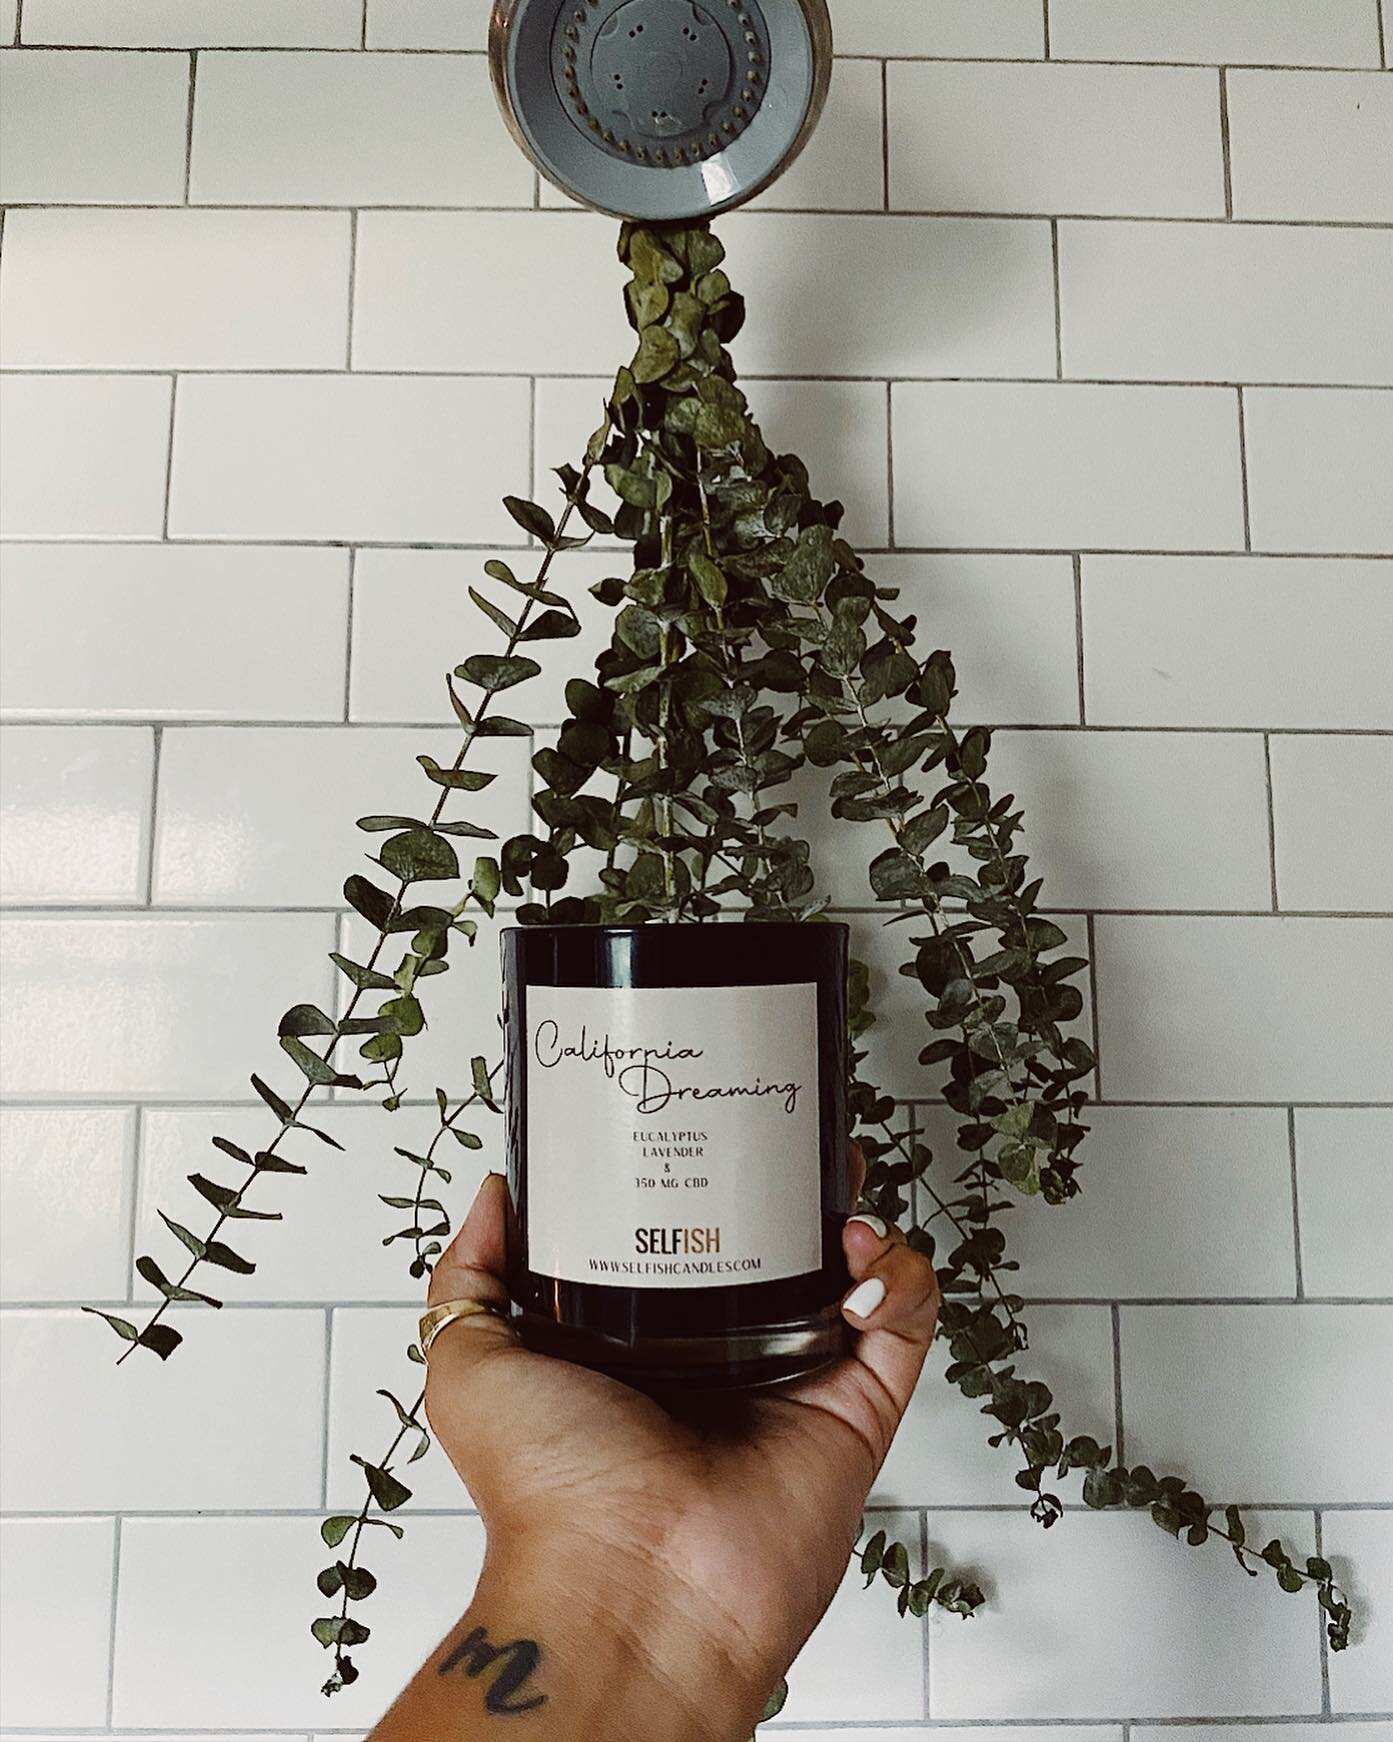 We&rsquo;ve got an early Christmas gift for y&rsquo;all! Our CBD candle has been restocked. Available now on our website. Grab it now before it&rsquo;s gone!
&bull;
&bull;
#cbd #cbdproducts #selfcare #candles #smallbusiness #blackownedbusiness